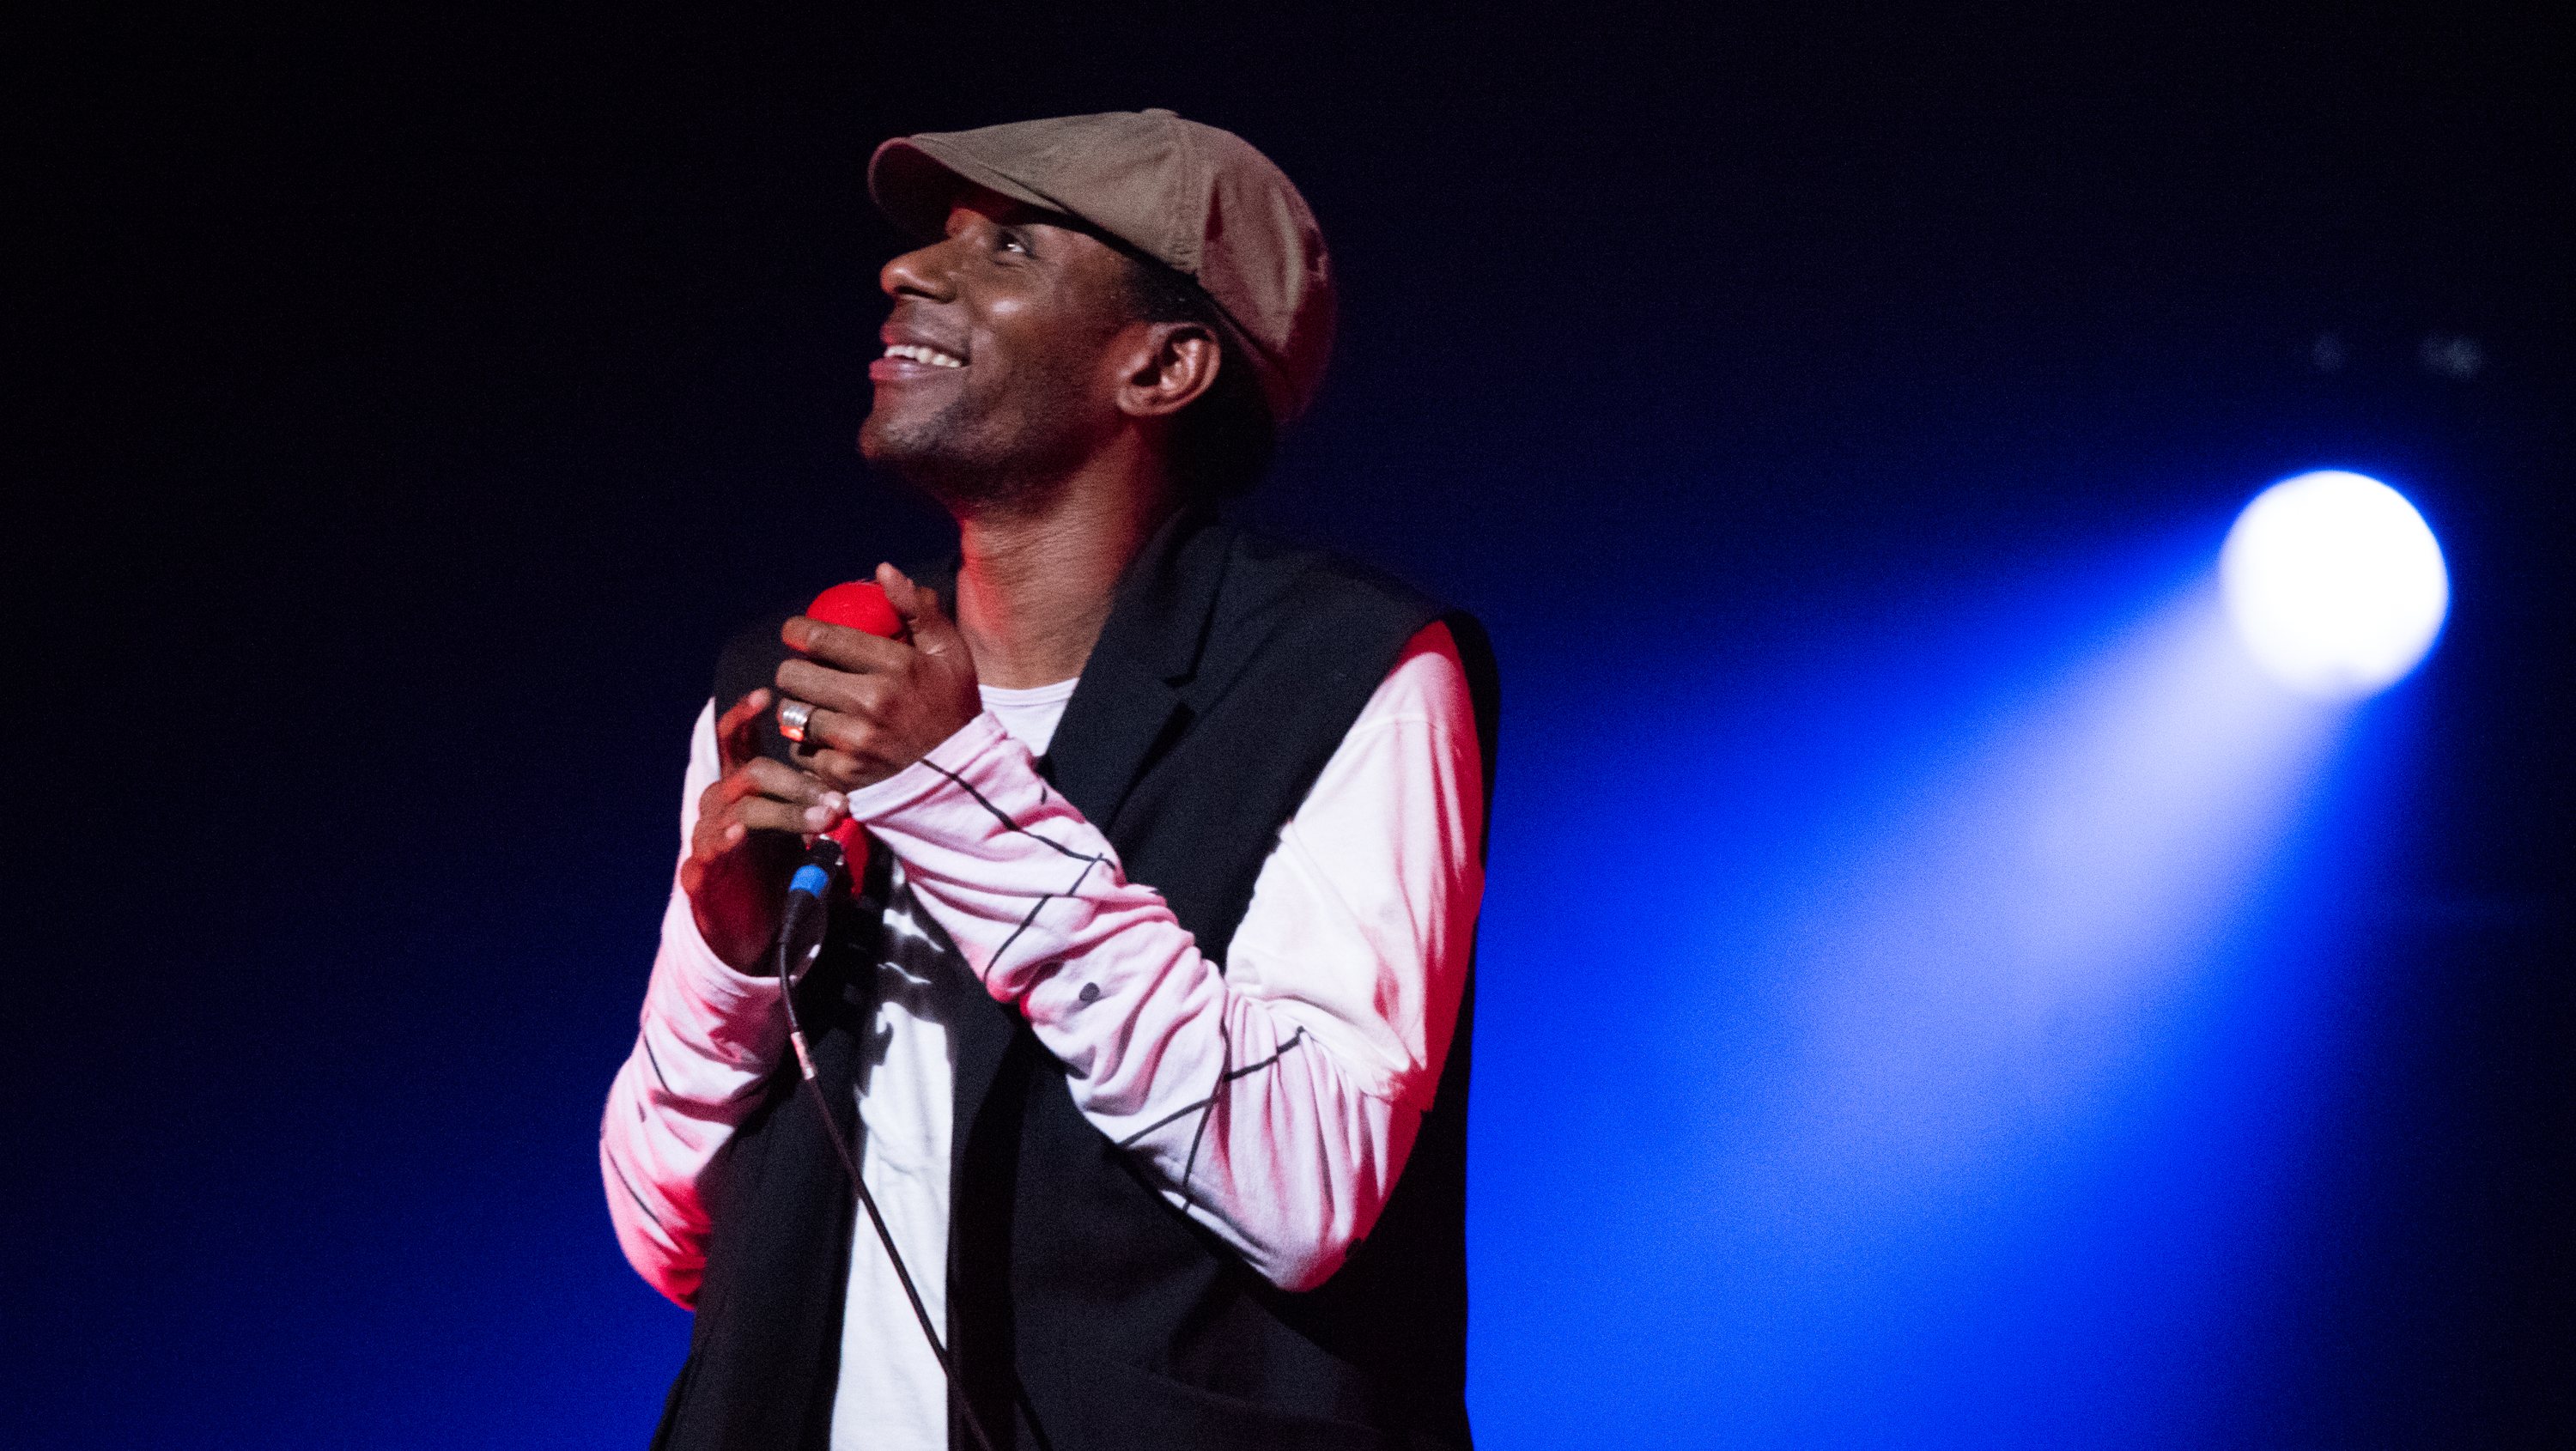 yasiin bey &amp;amp; Friends In Concert - New York, NY